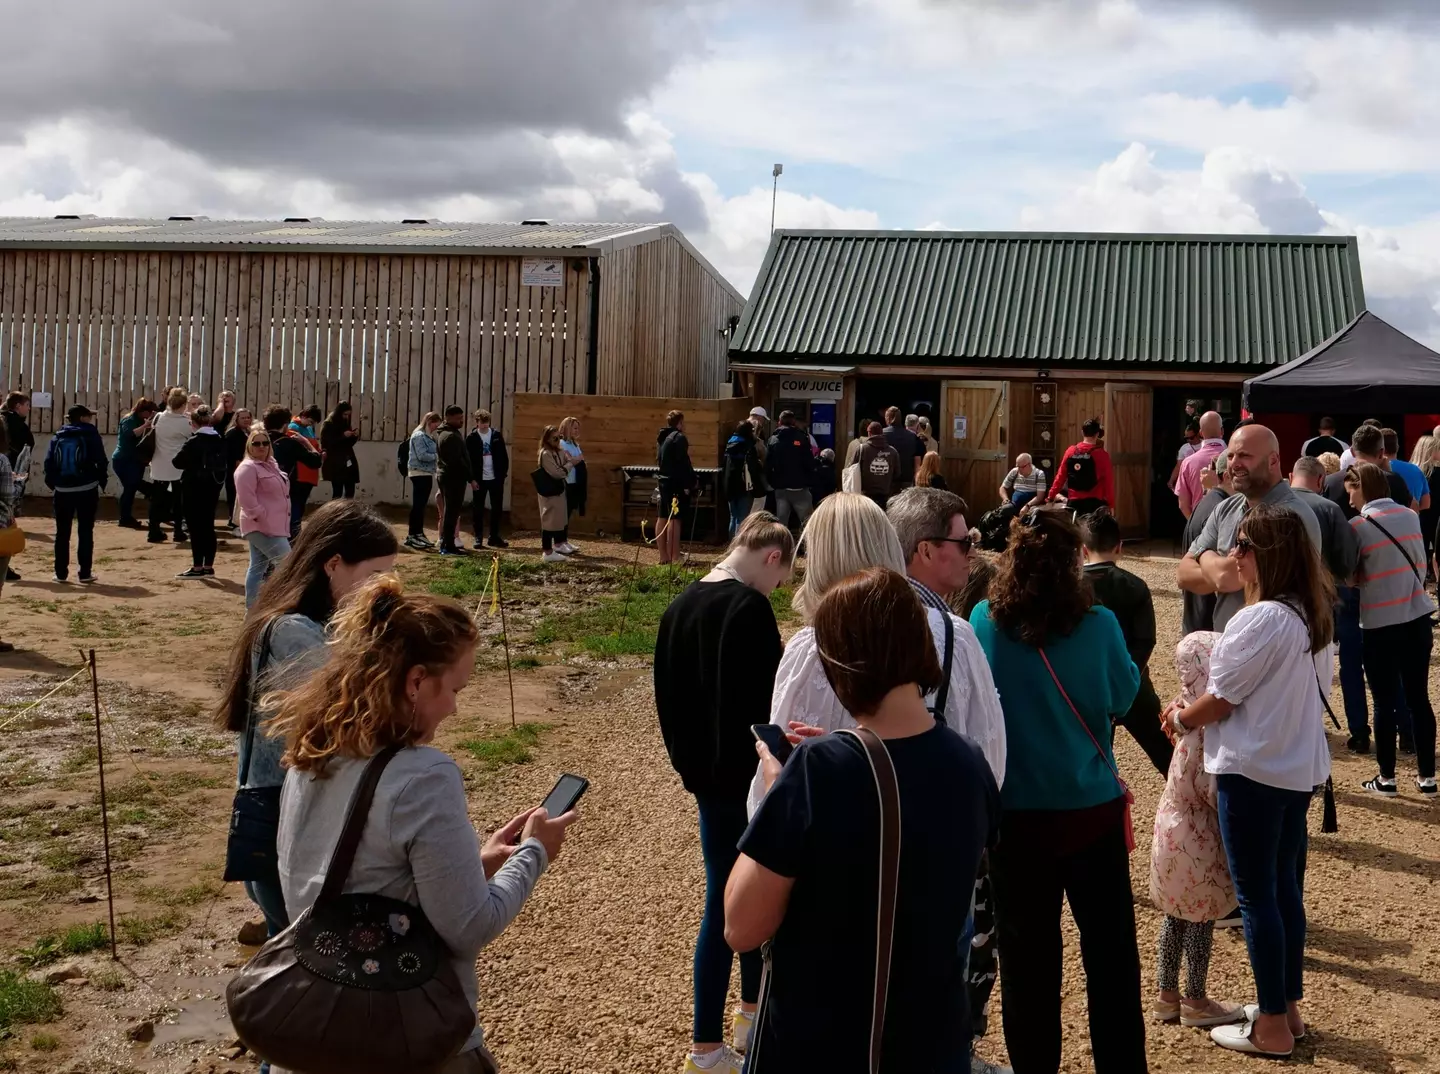 Clarkson was able to bolster his income by bringing in big crowds to his farm shop, and acknowledged many other farmers wouldn't be able to do the same.